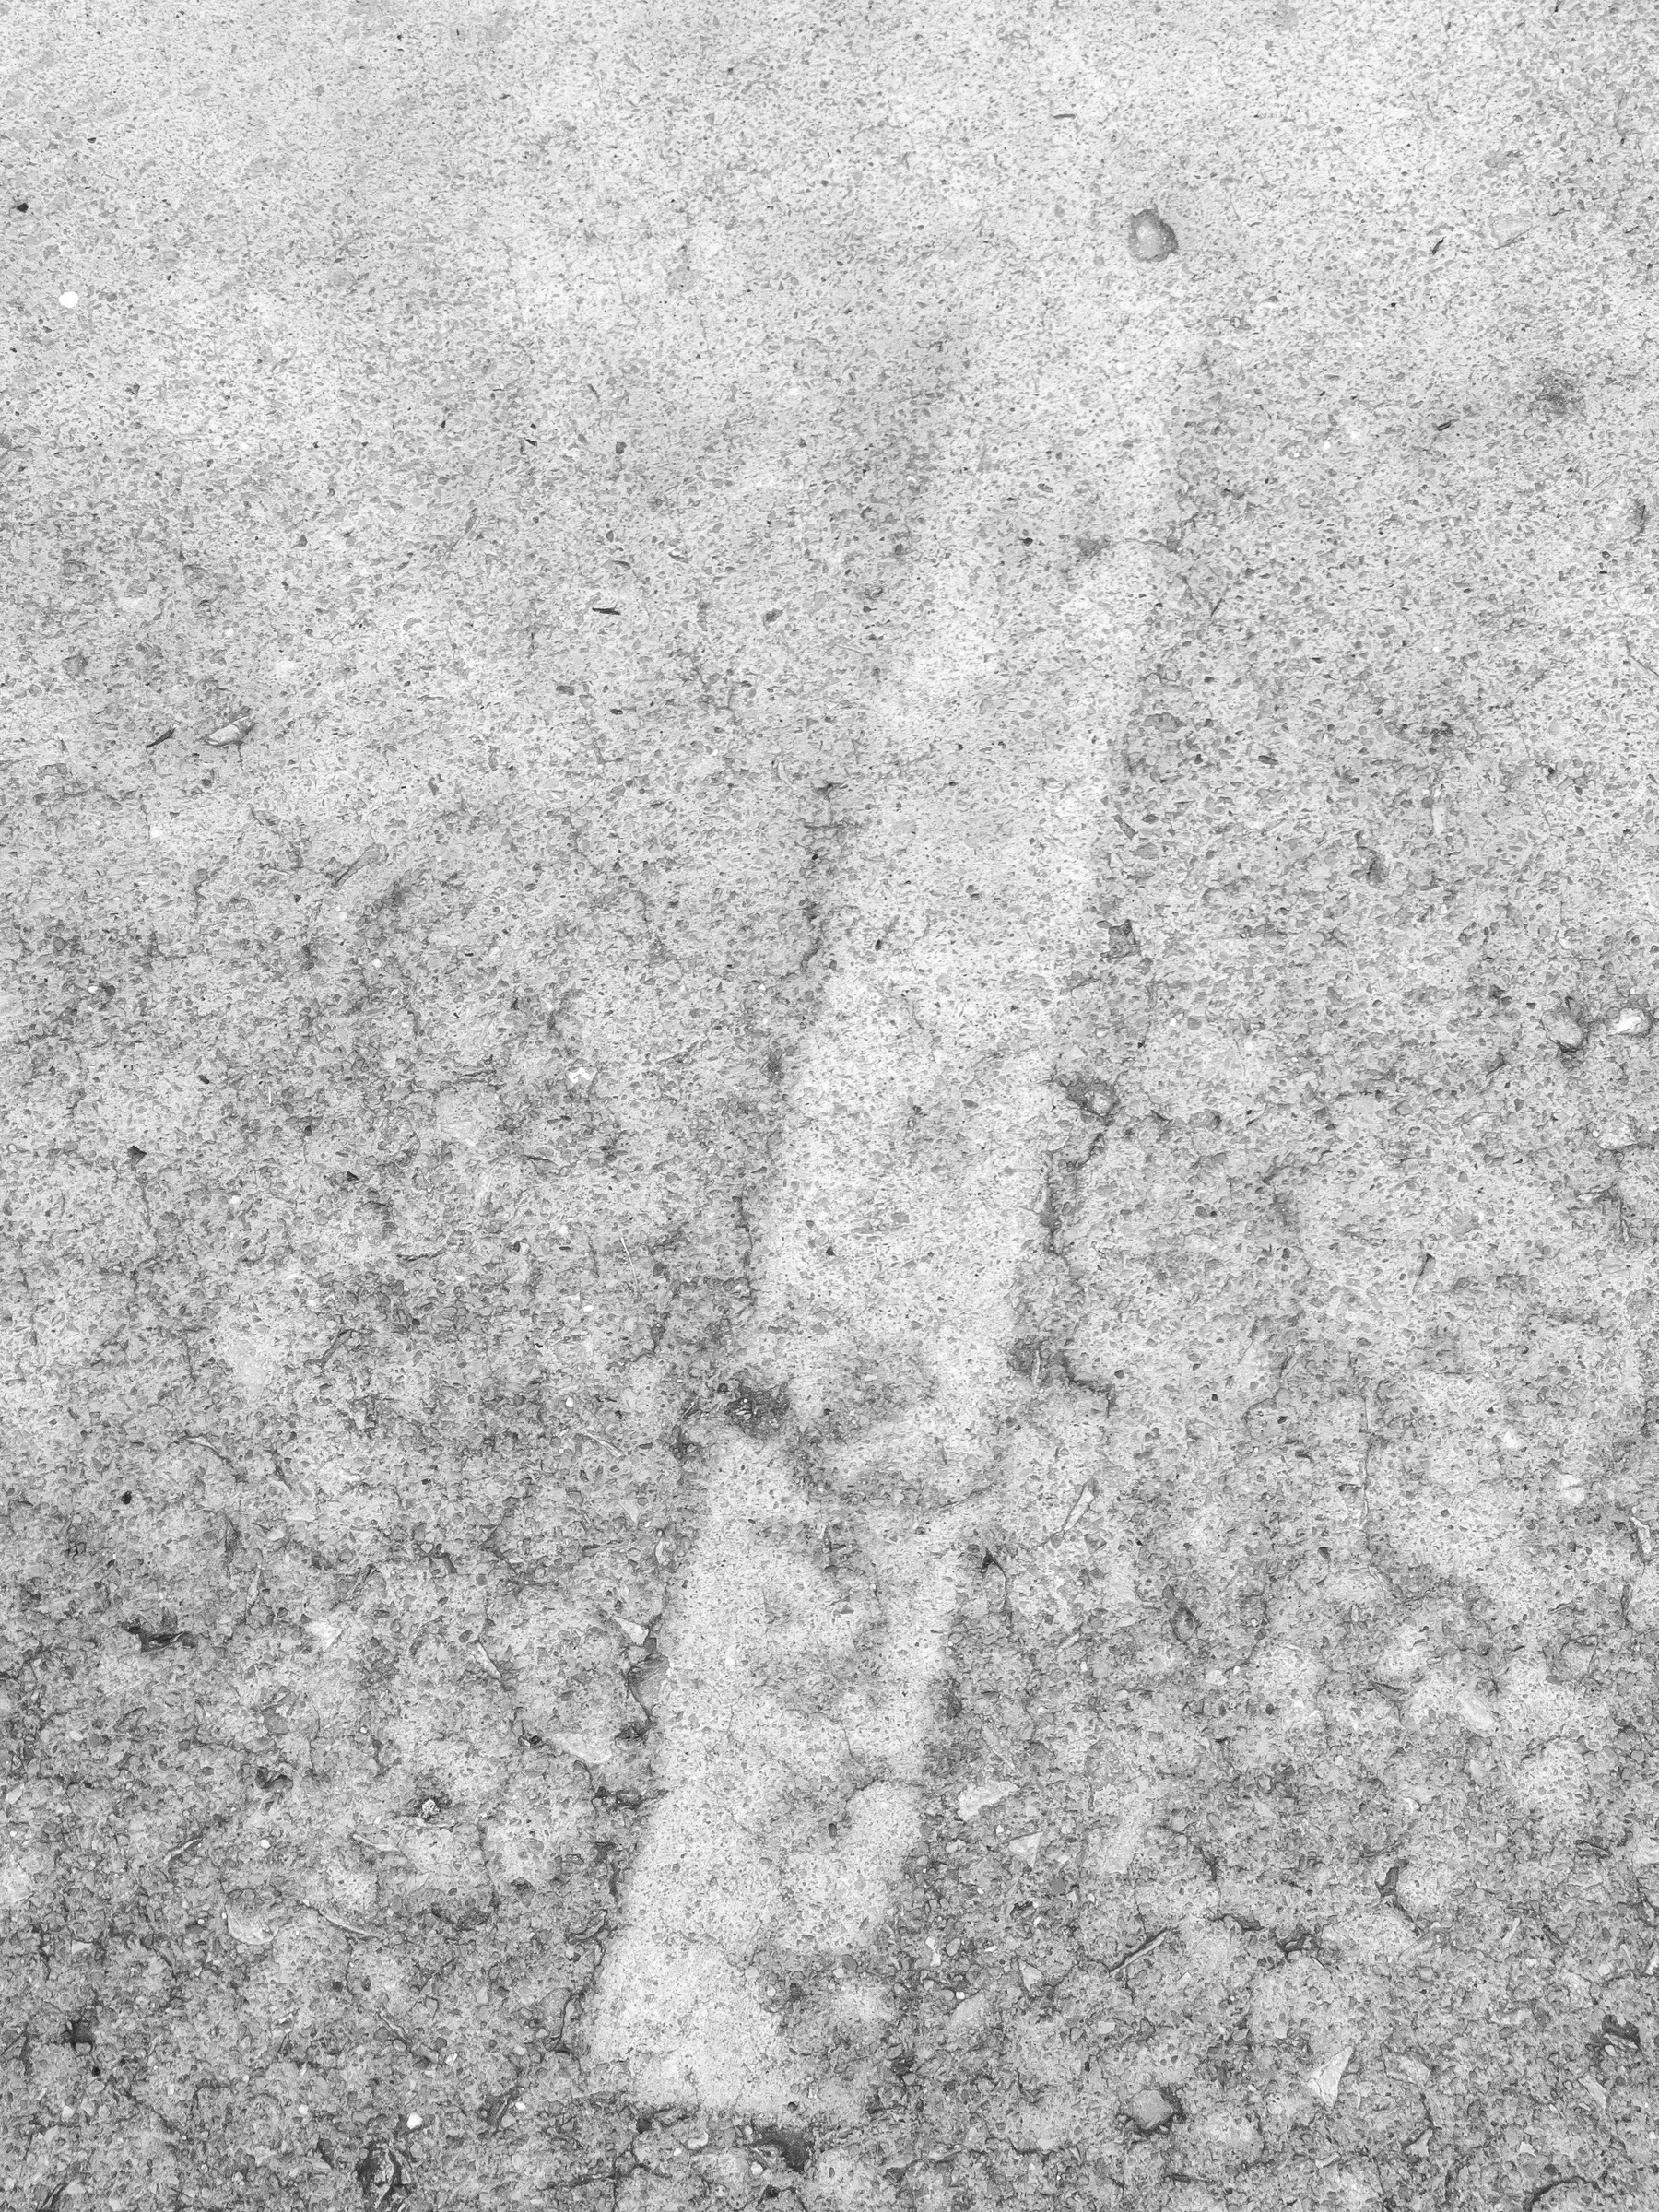 Ghost outline of a board on the sidewalk running at a slight angle from bottom to top.